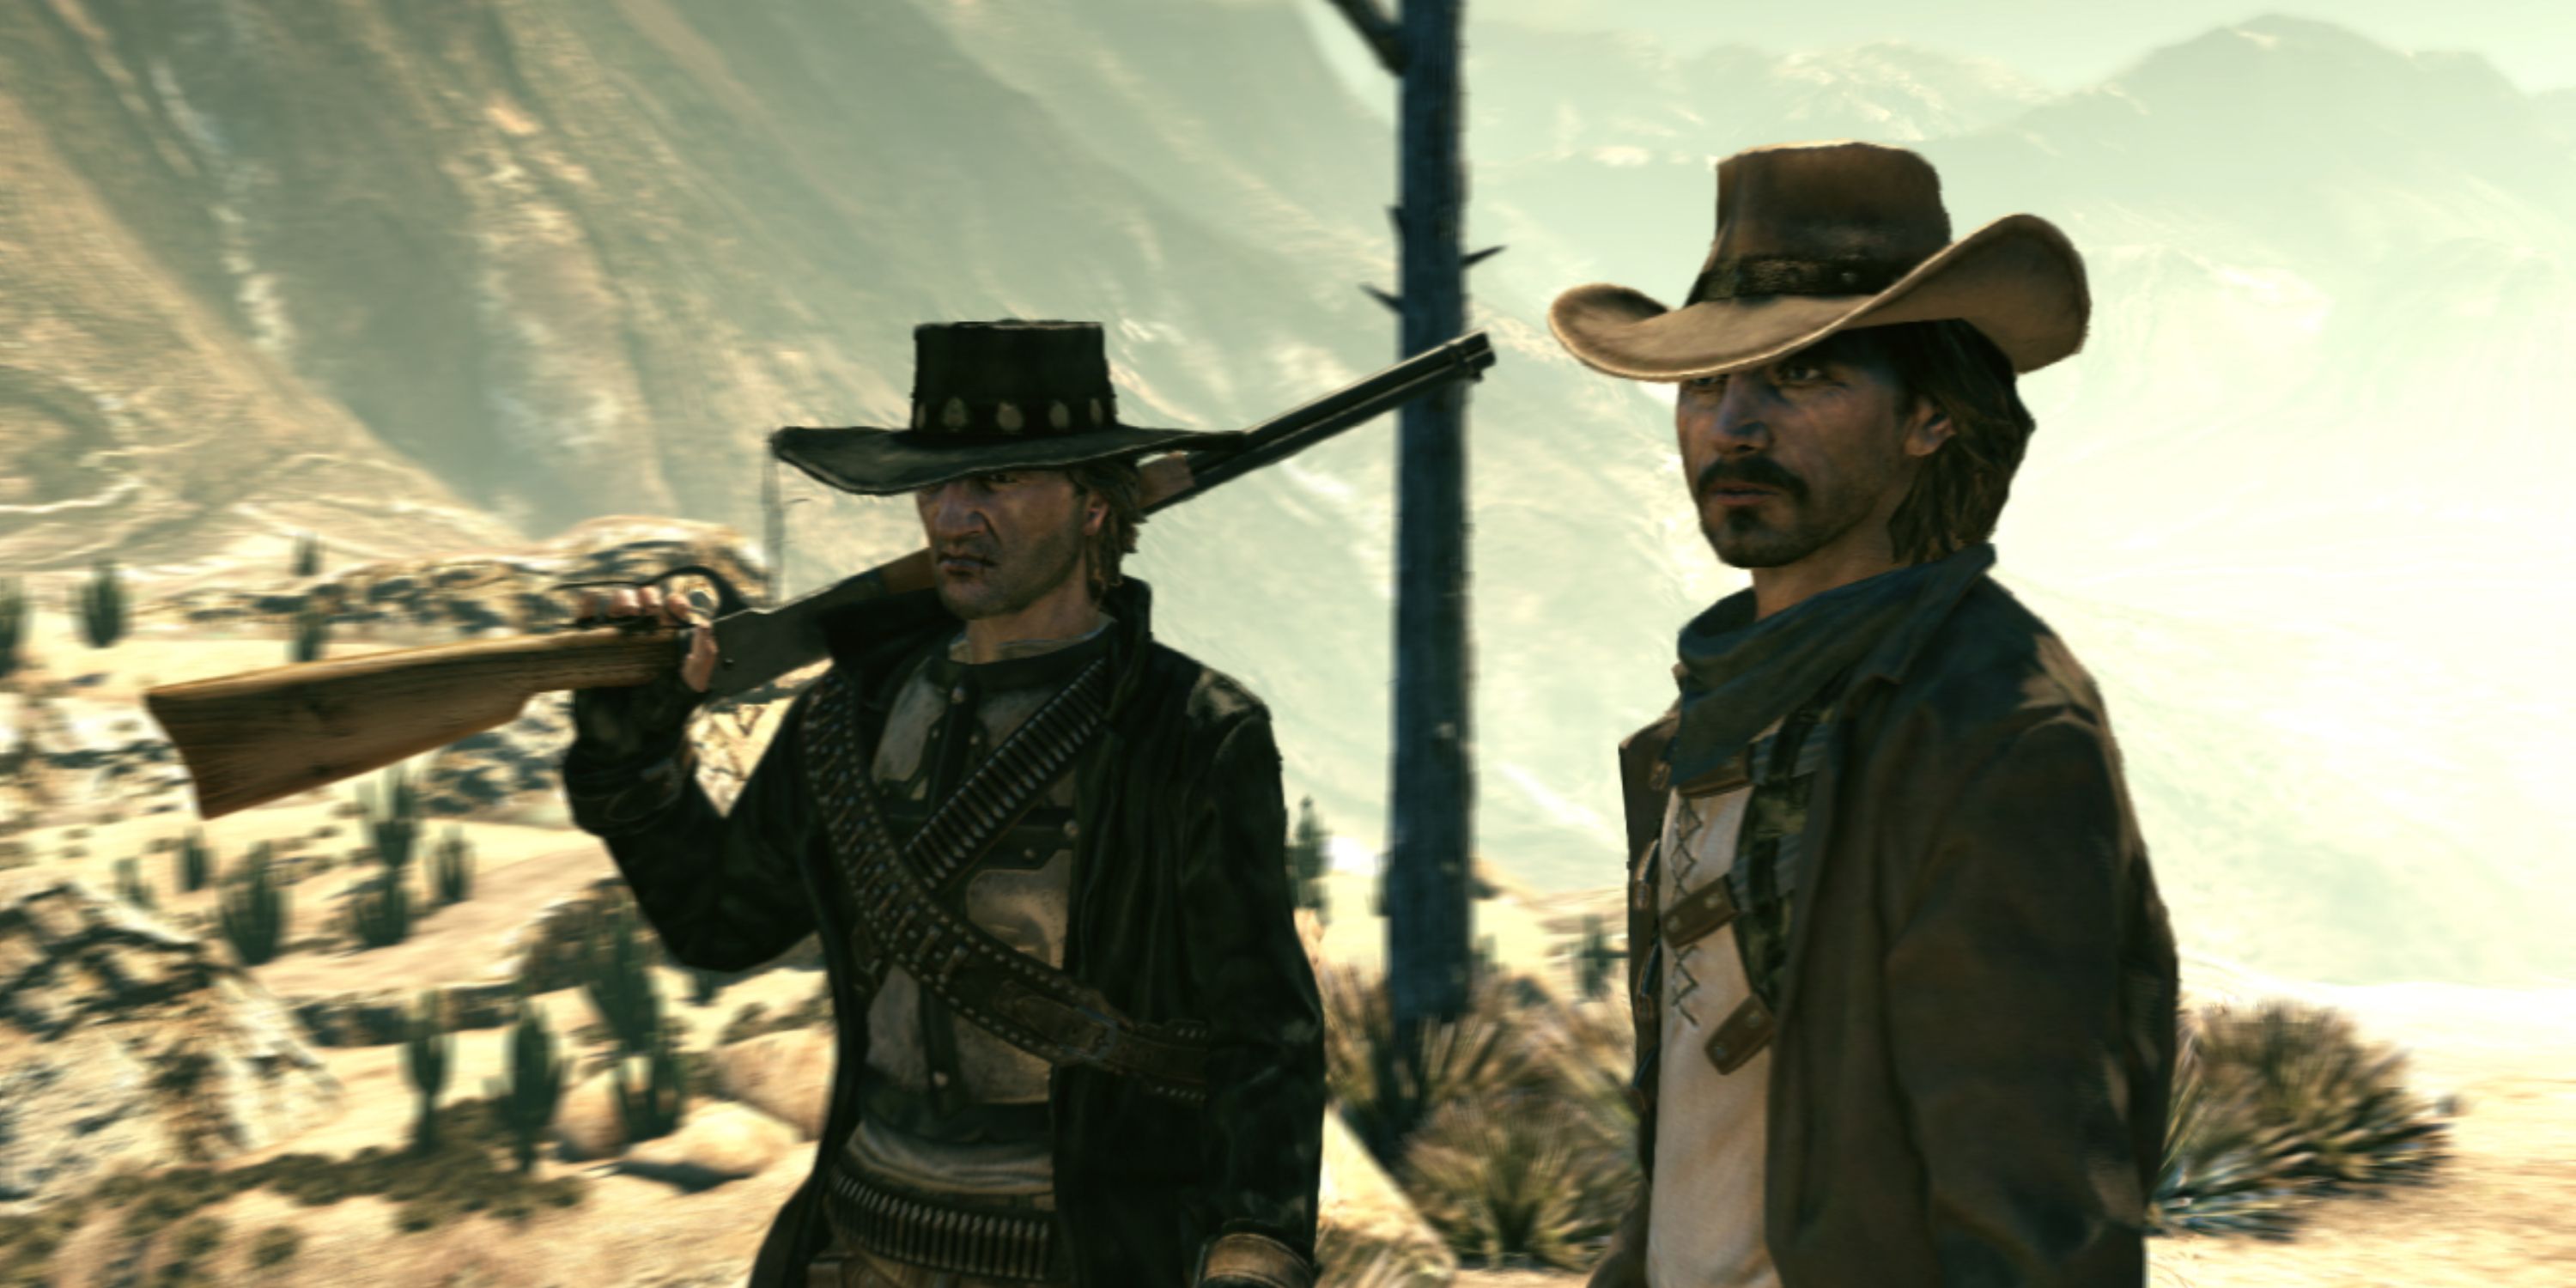 The McCall brothers in the Wild West